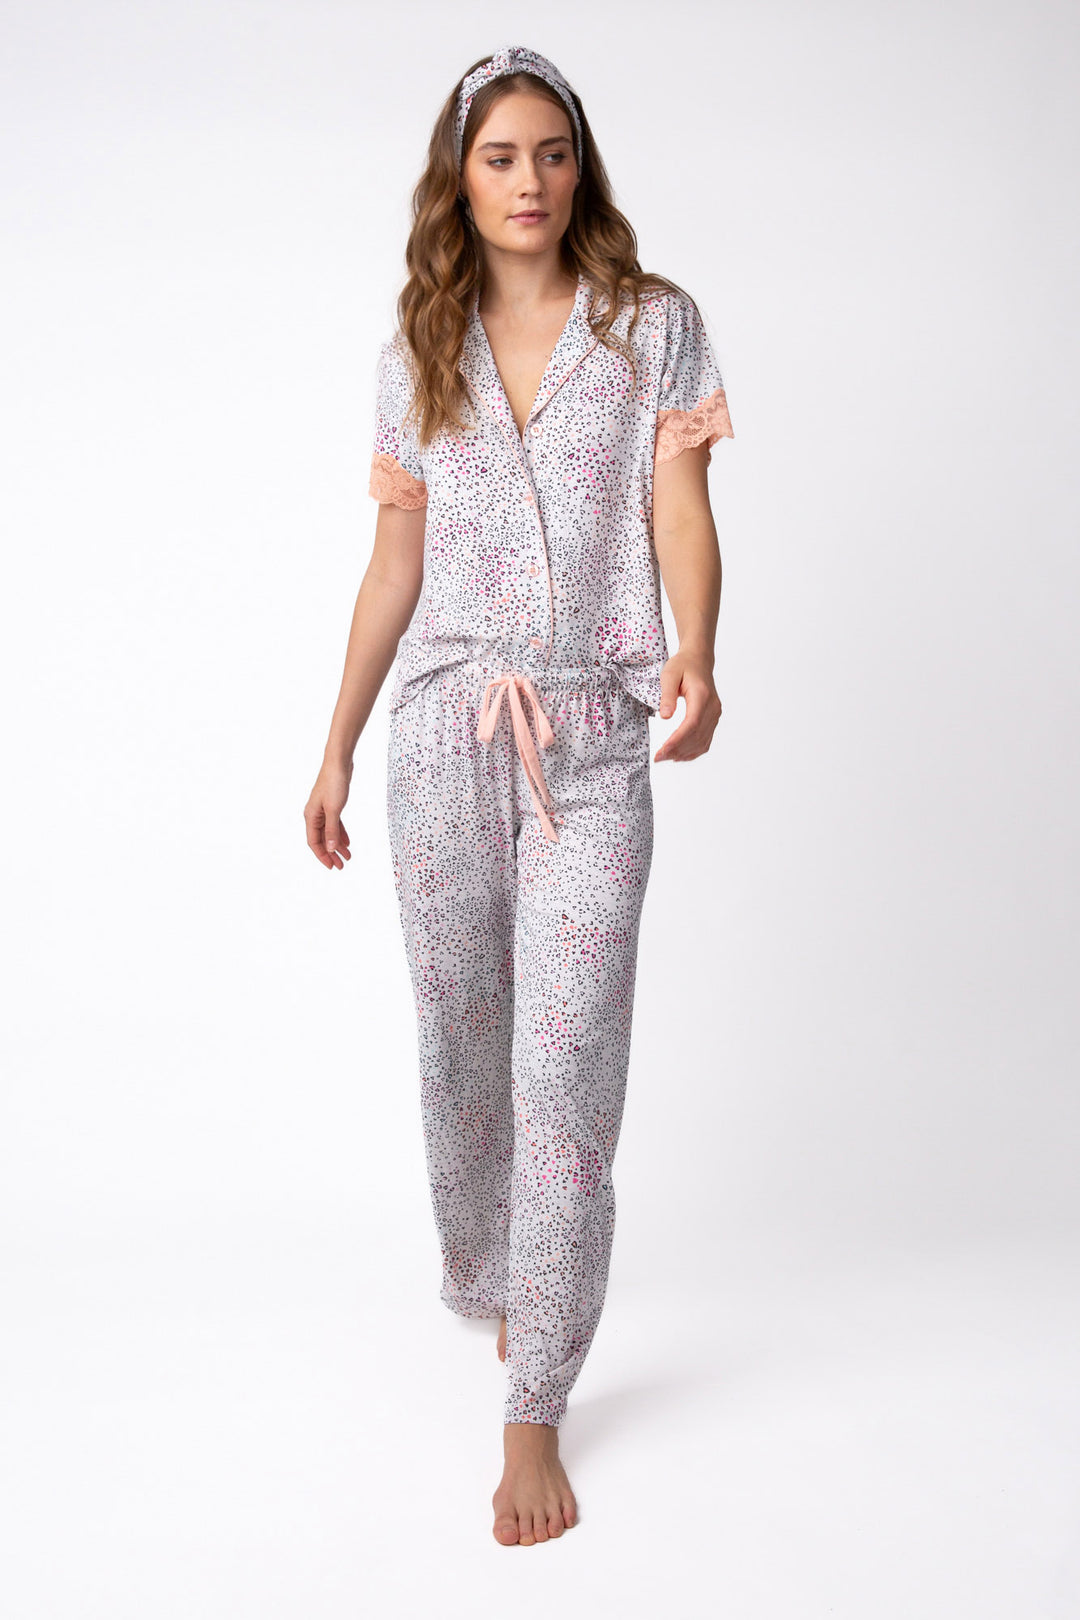 Mini heart-print ivory modal pajama set top with lace-trimmed sleeves & ties at waist.